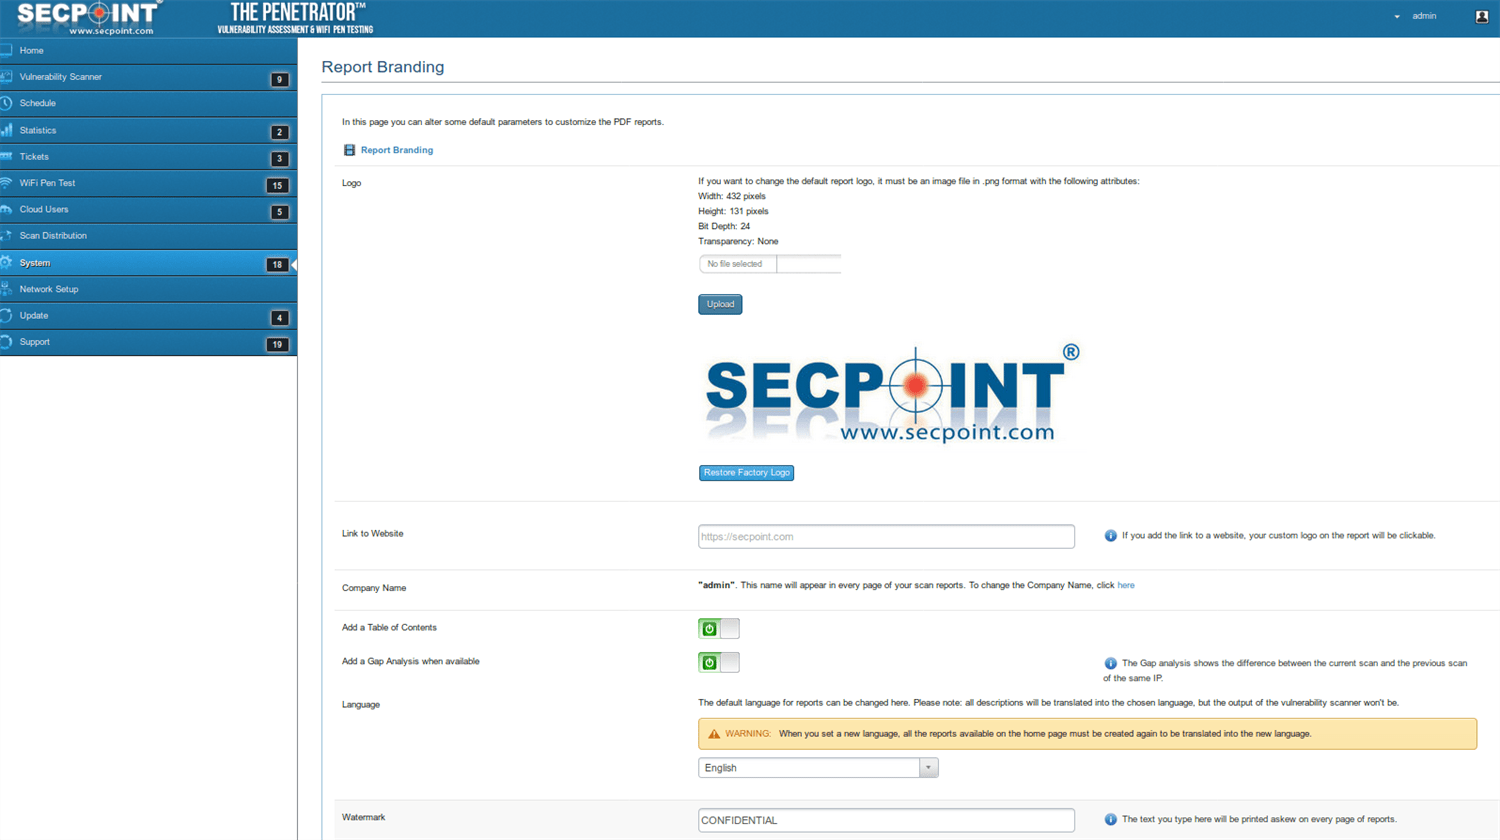 SecPoint Penetrator S9 - 16 IP Concurrent Scan License Vuln Scanning (3 Years License) - SecPoint